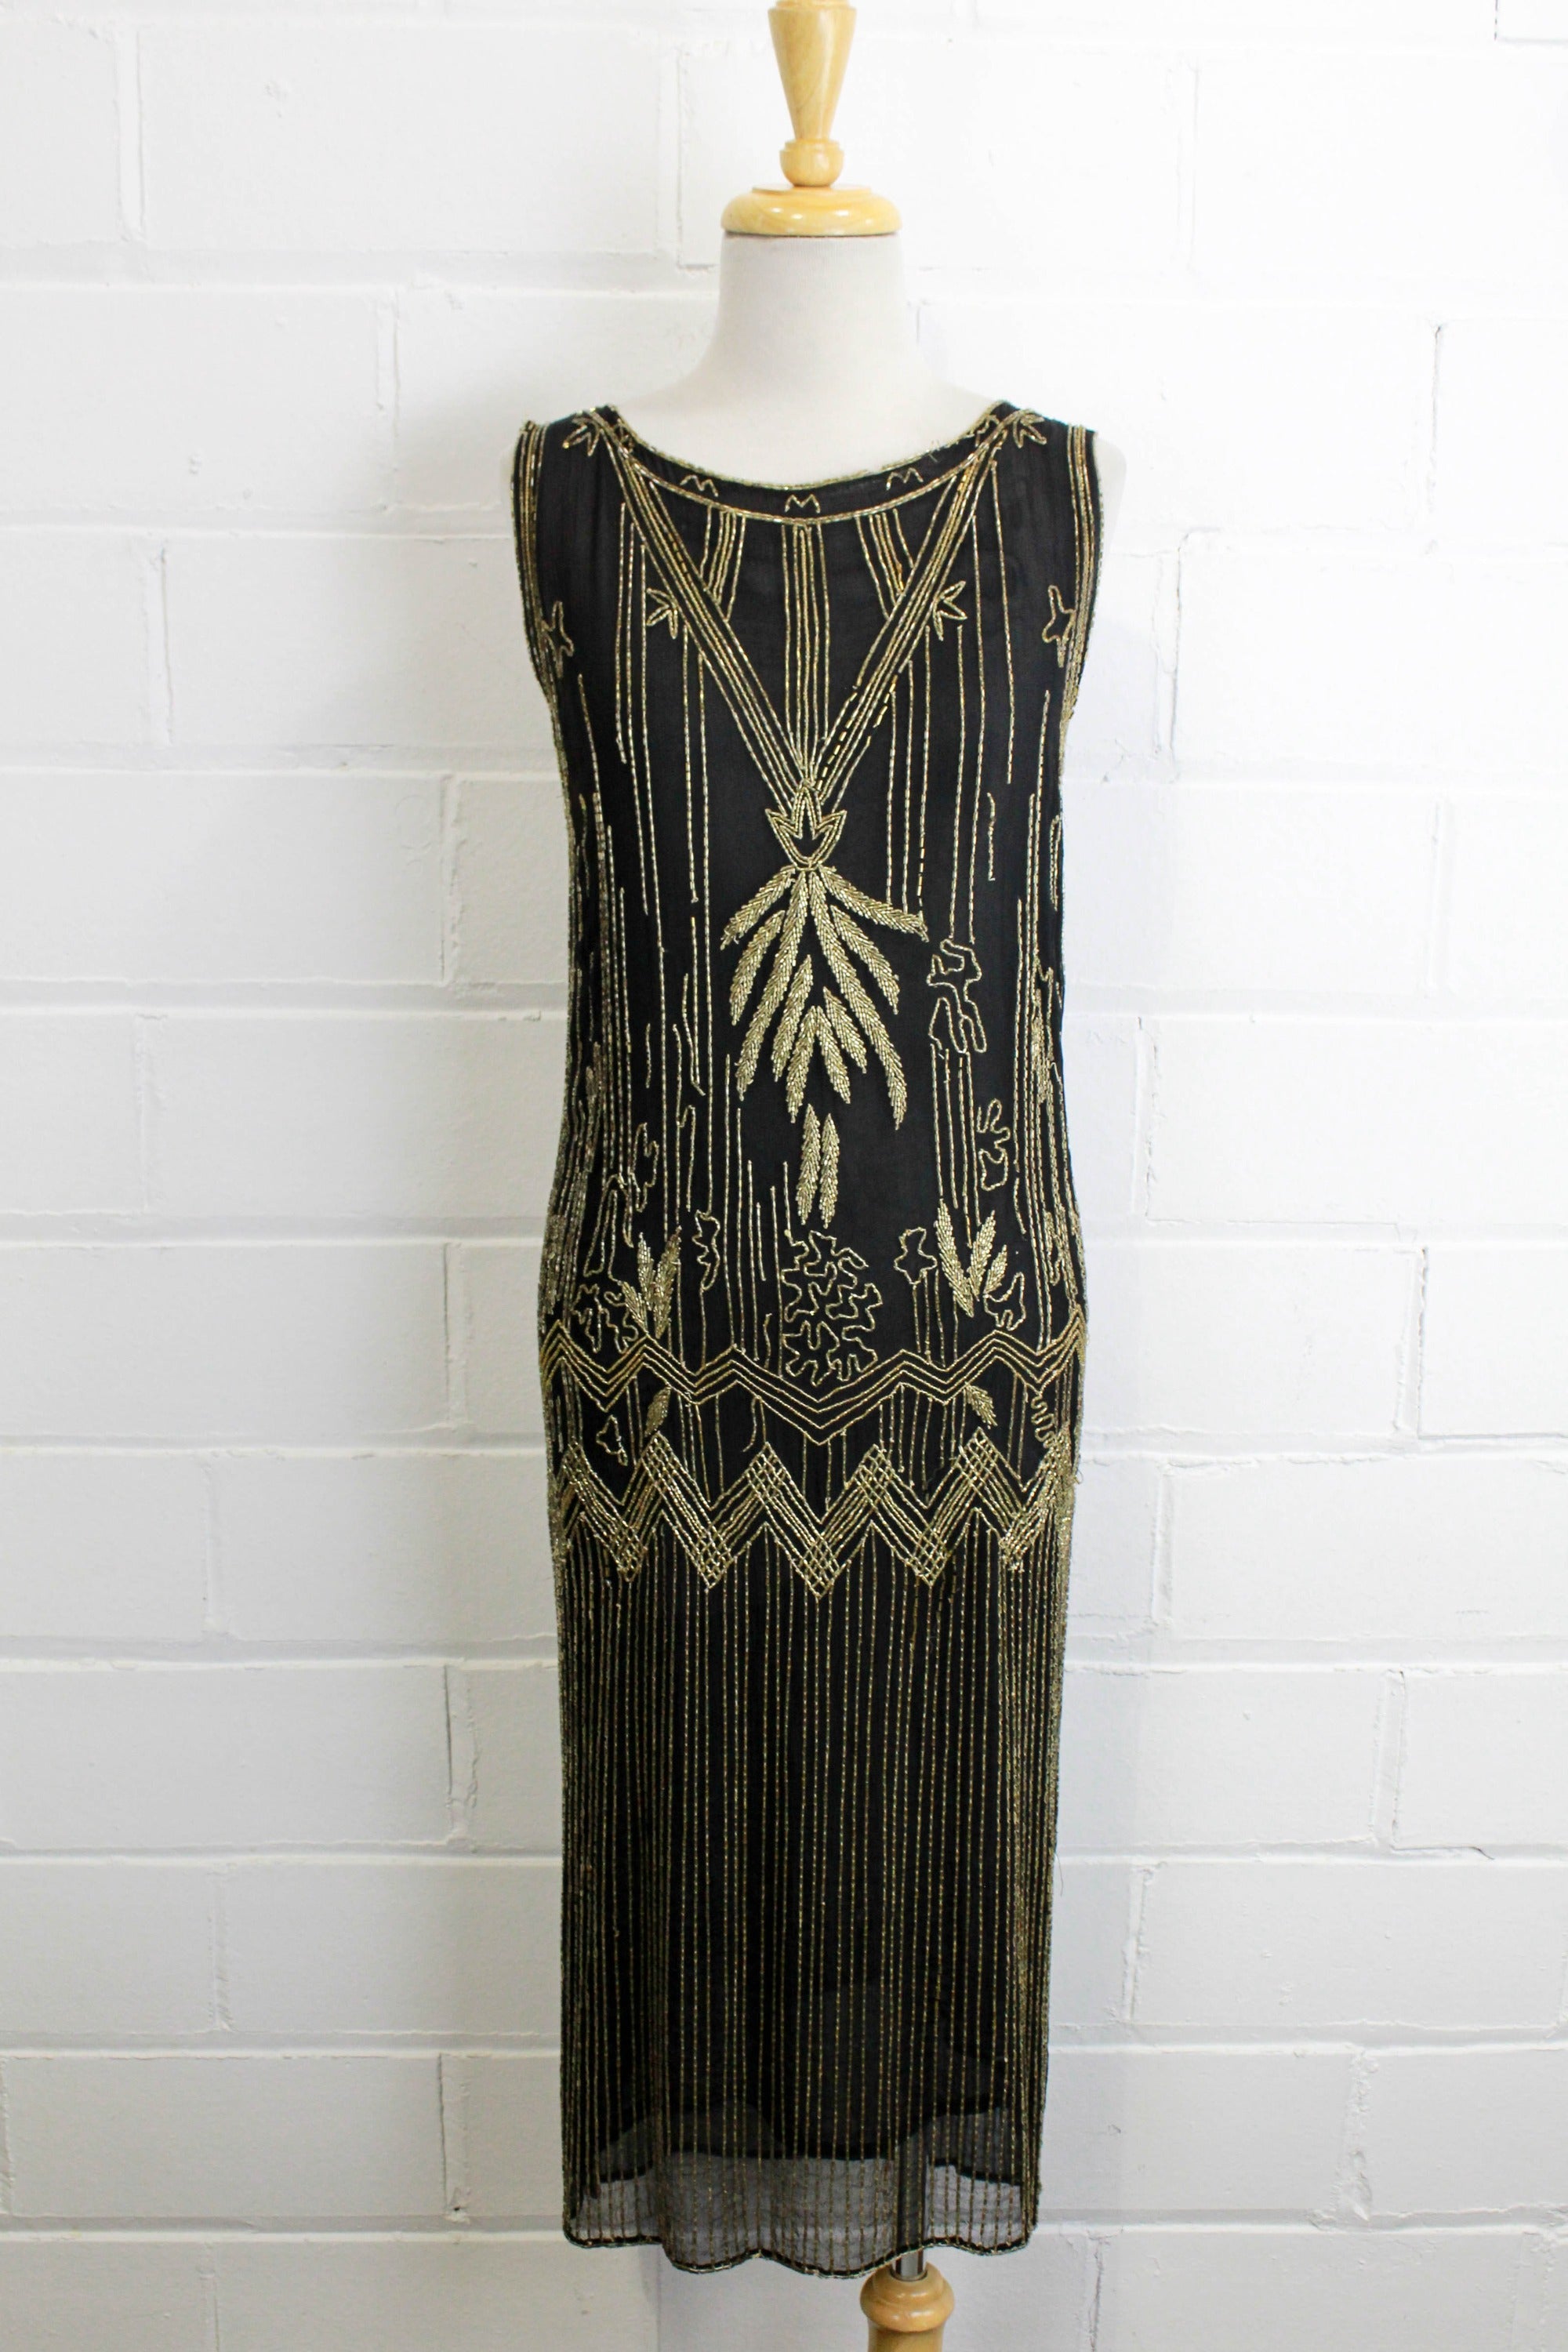 1920's Flapper Fringe Gatsby Party Dress - The Zenith - Silver on Blac